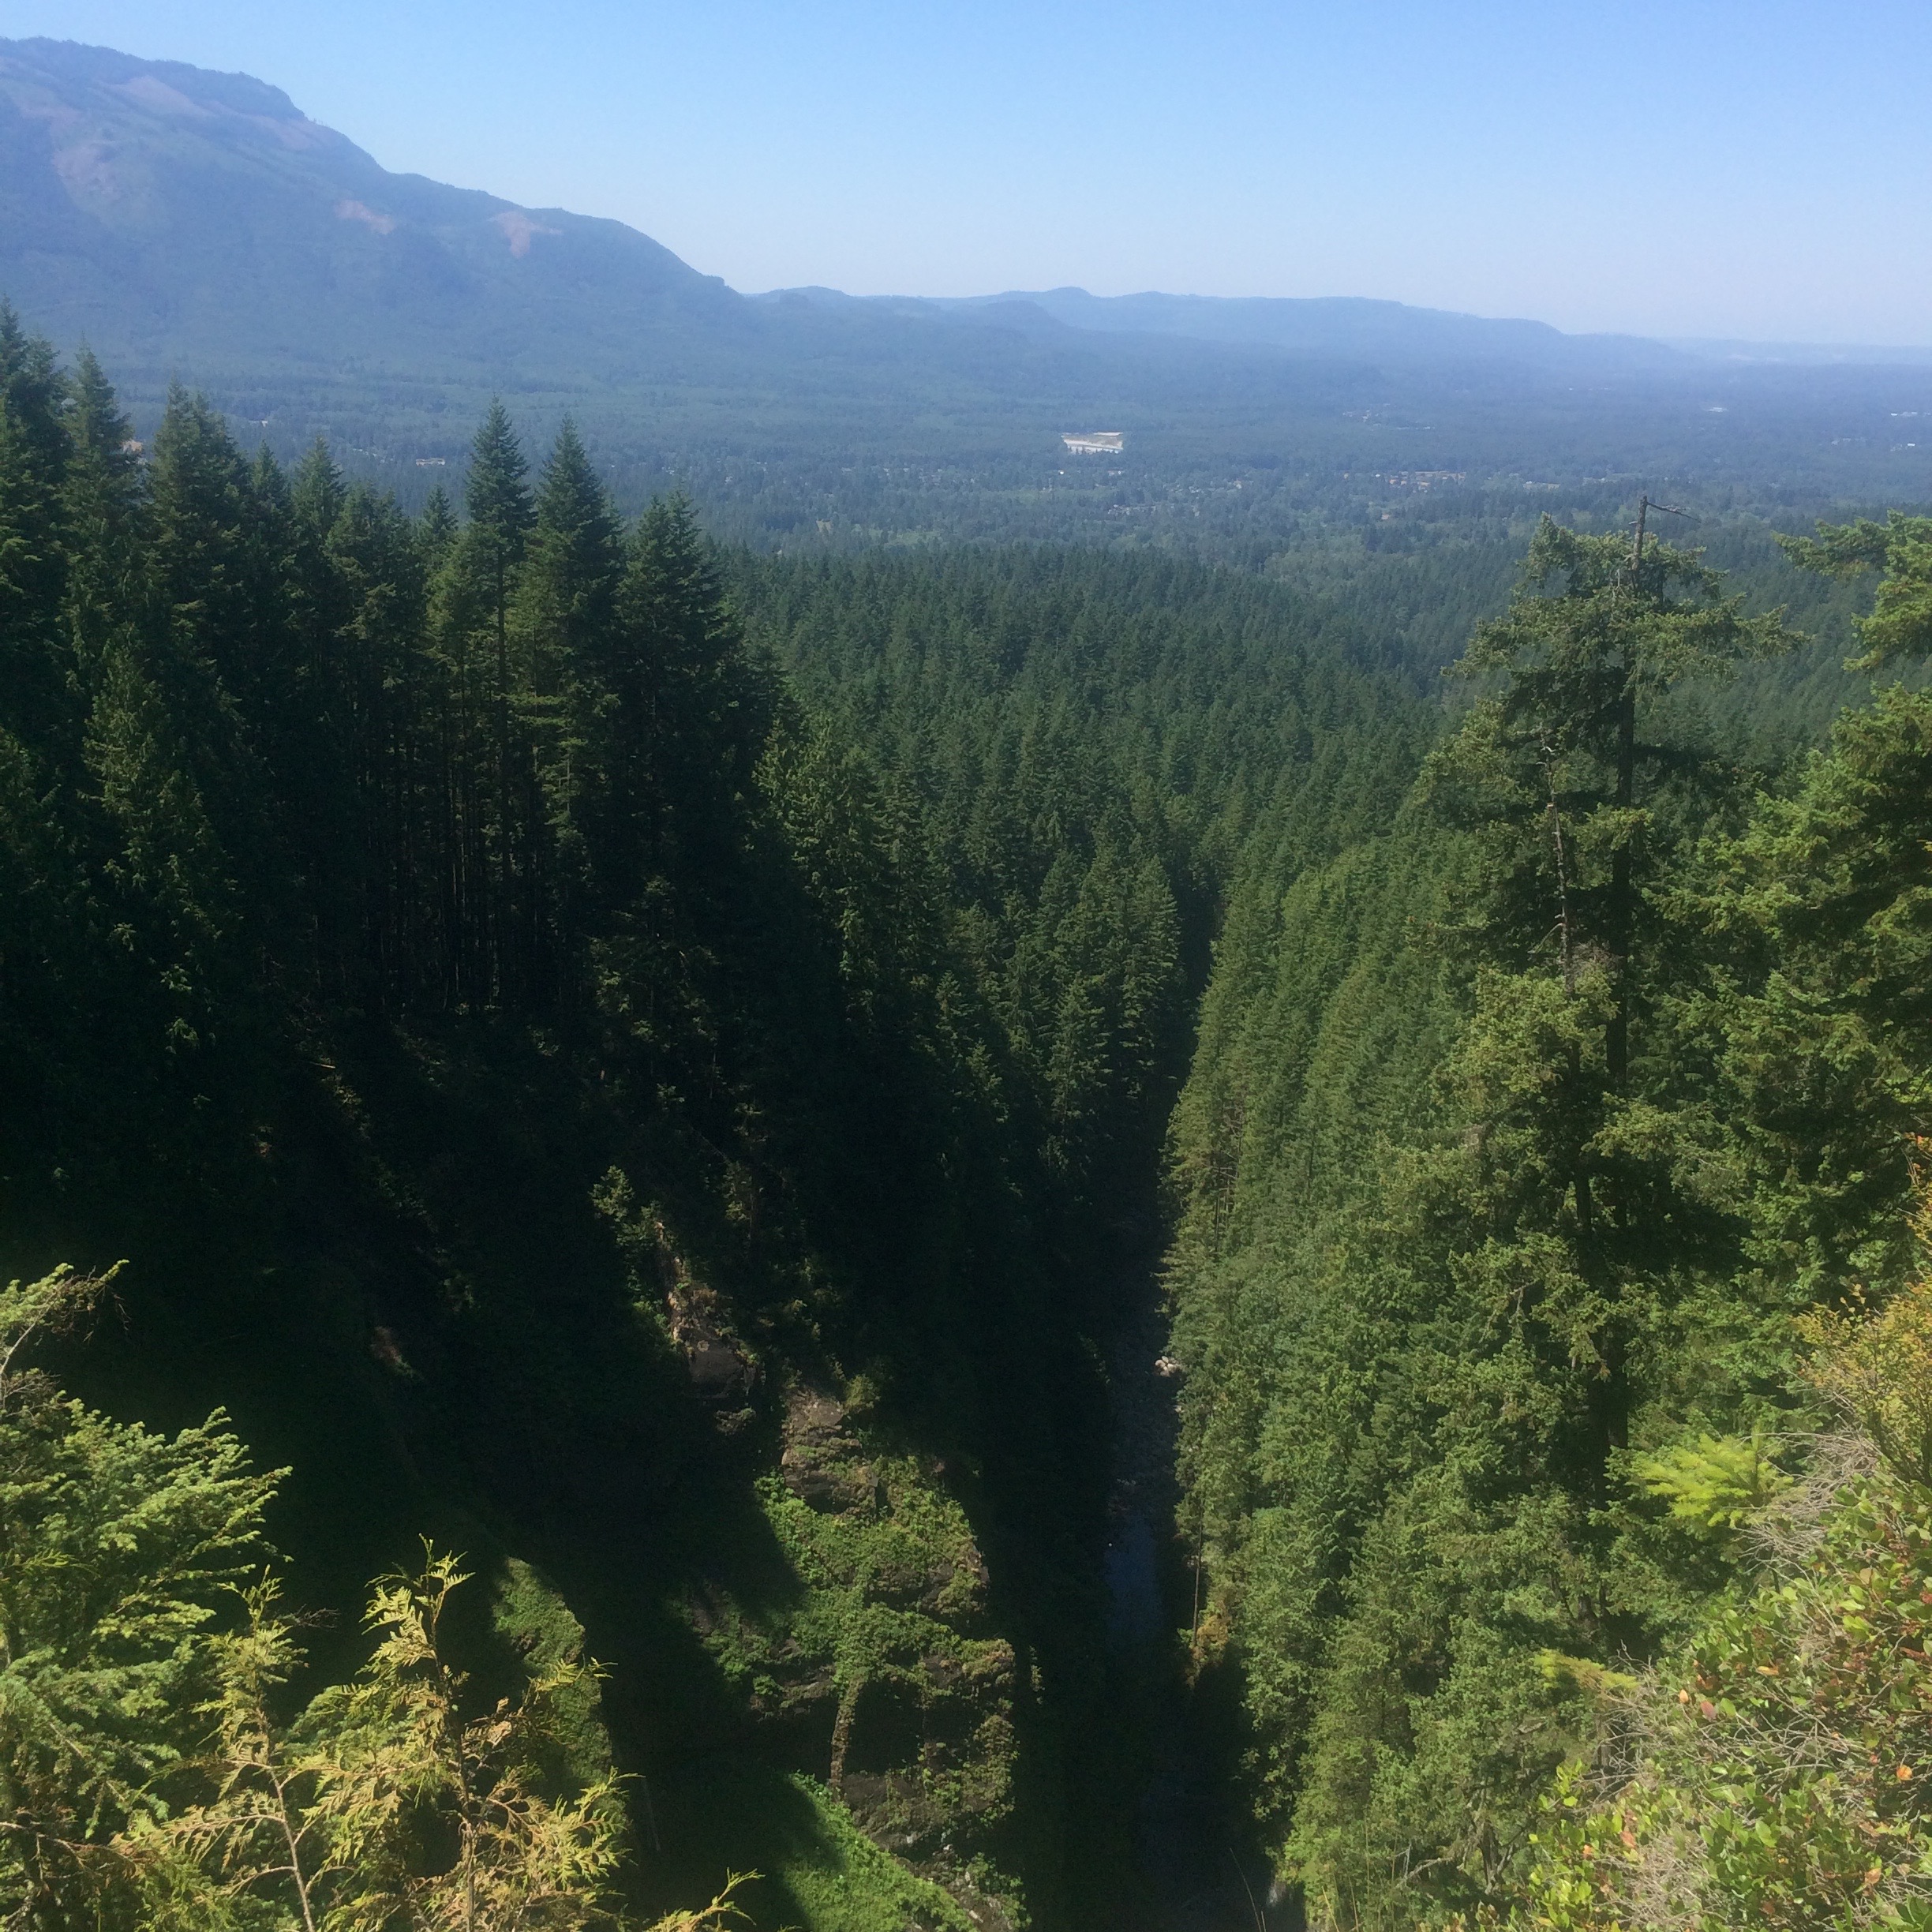 Best Hikes in the Cascades - Twin Falls